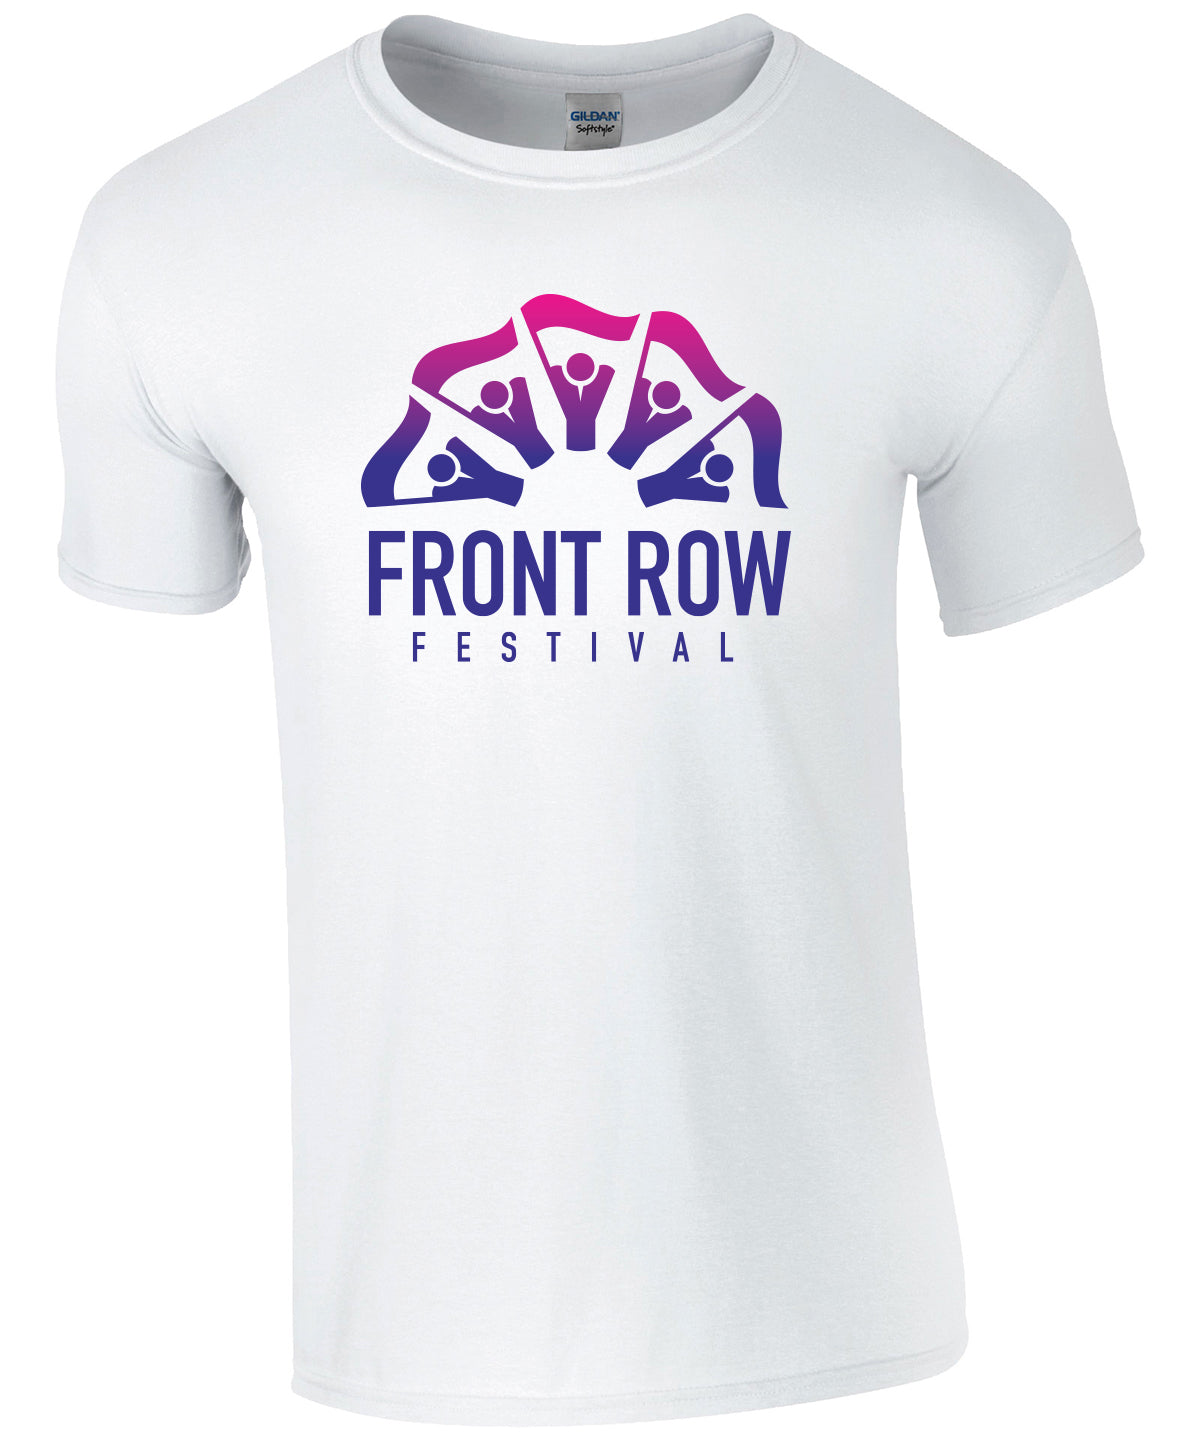 Adult T-Shirt in white - Front Row Festival